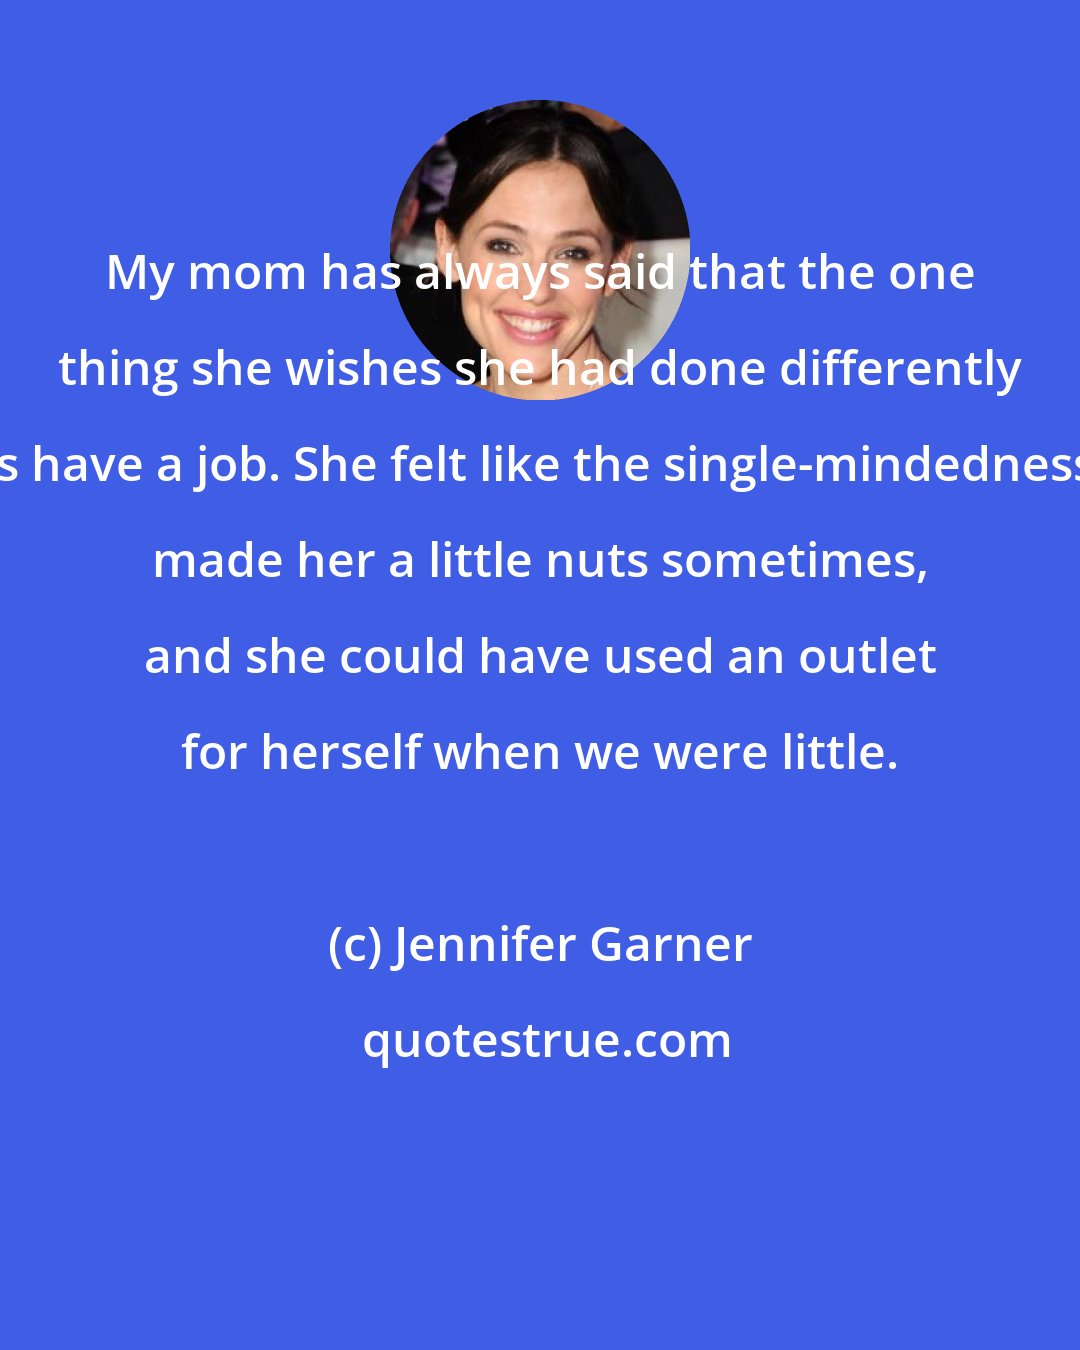 Jennifer Garner: My mom has always said that the one thing she wishes she had done differently is have a job. She felt like the single-mindedness made her a little nuts sometimes, and she could have used an outlet for herself when we were little.